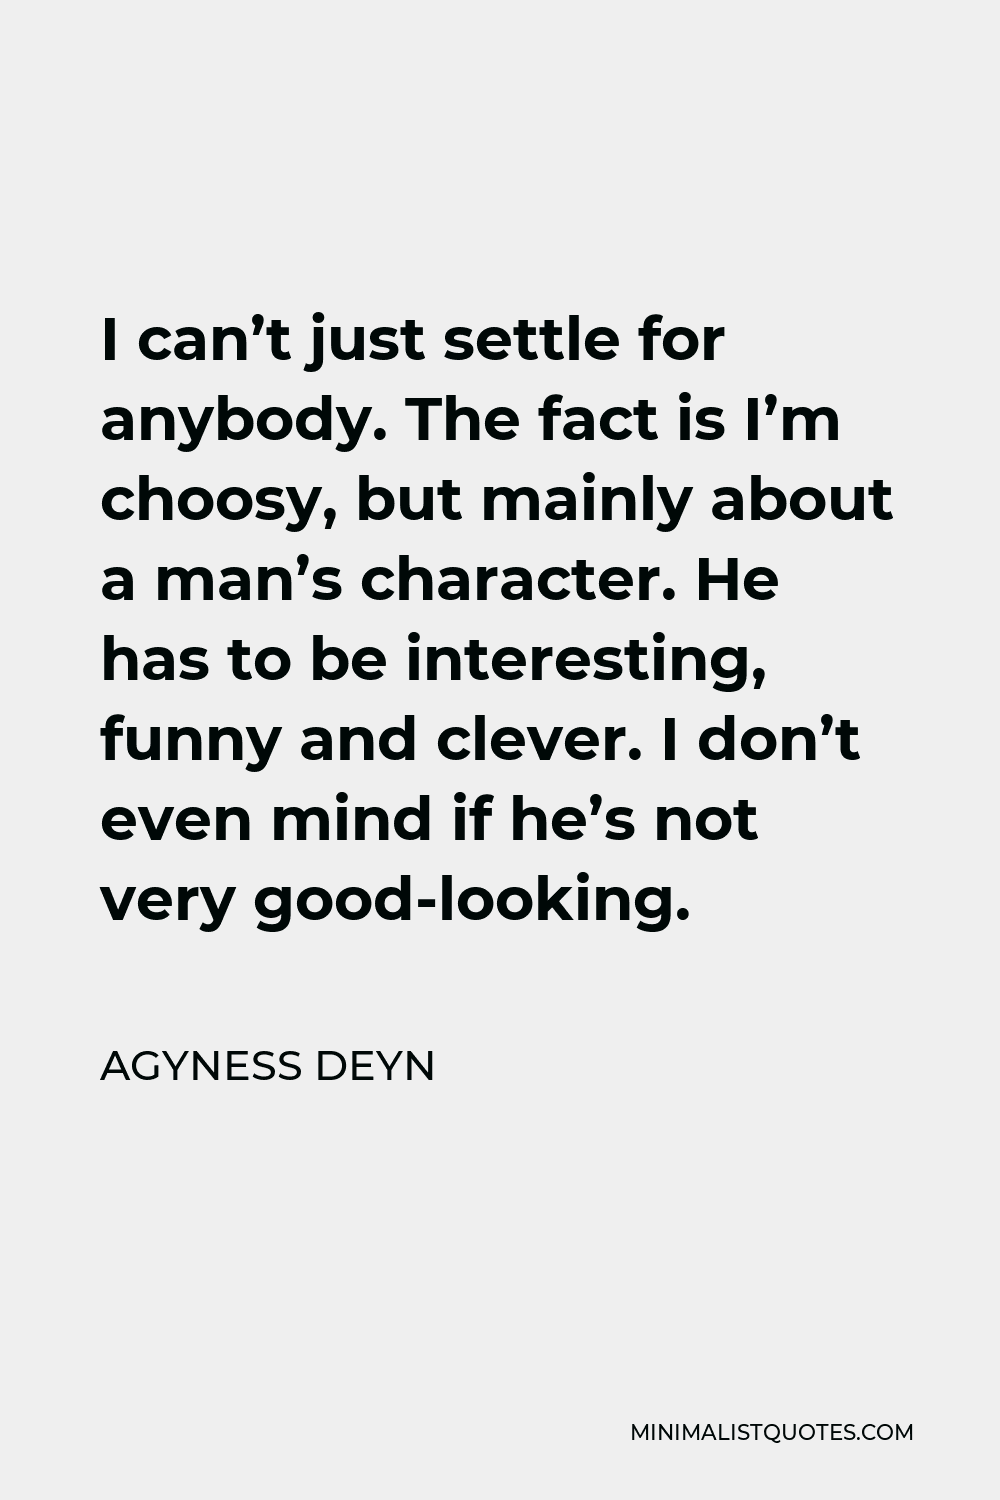 Agyness Deyn Quote - I can’t just settle for anybody. The fact is I’m choosy, but mainly about a man’s character. He has to be interesting, funny and clever. I don’t even mind if he’s not very good-looking.